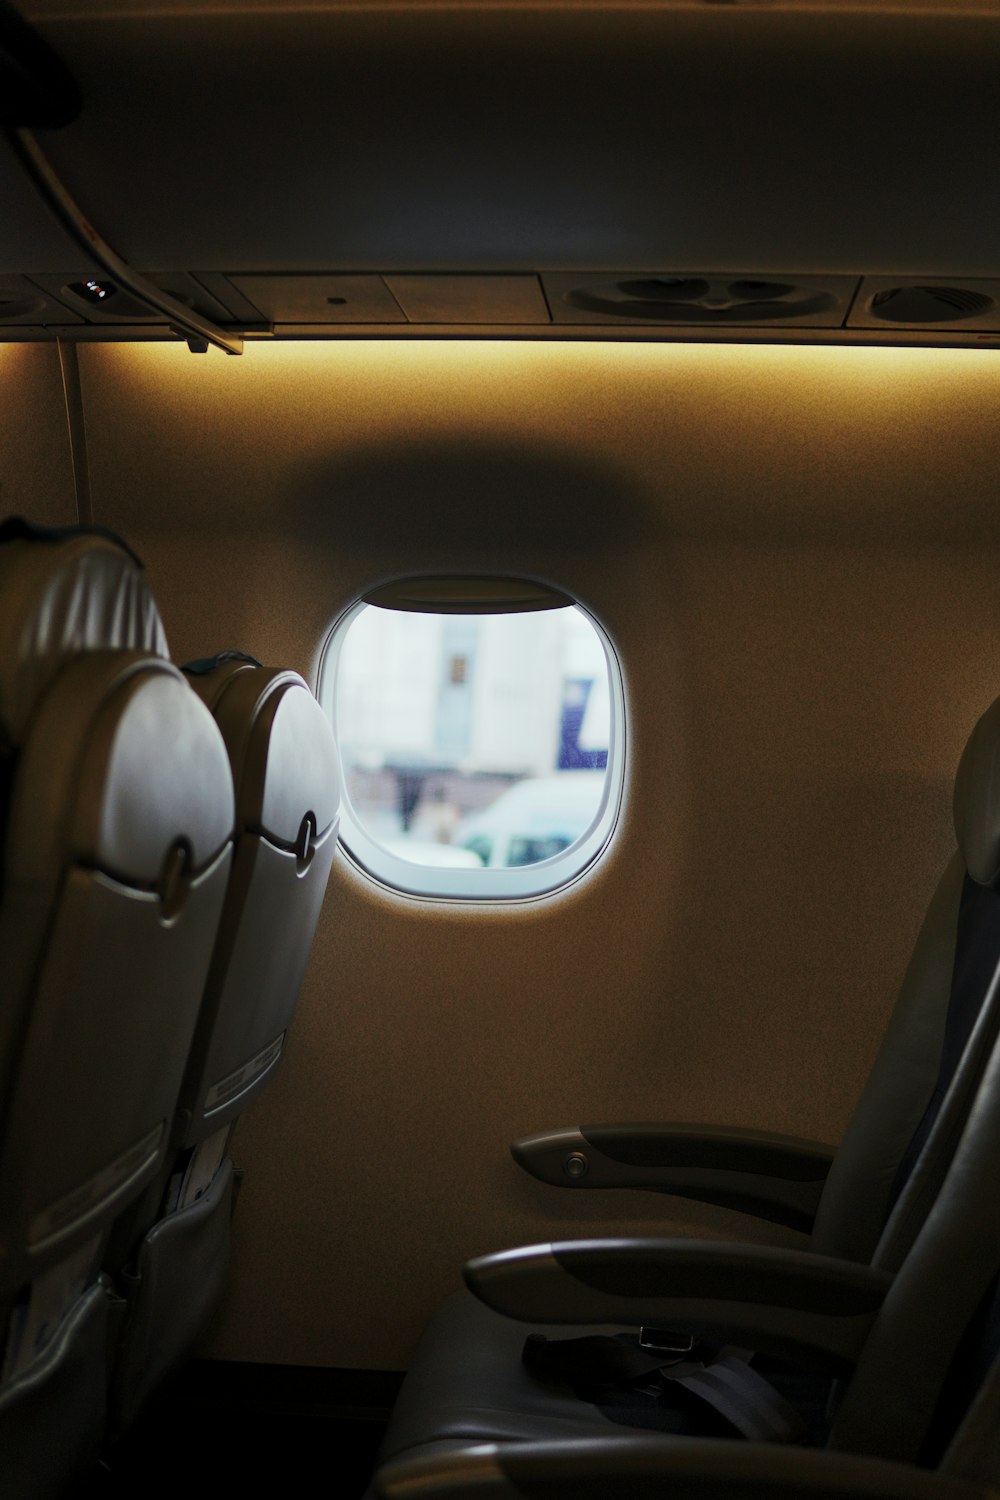 a view of the inside of an airplane looking out the window